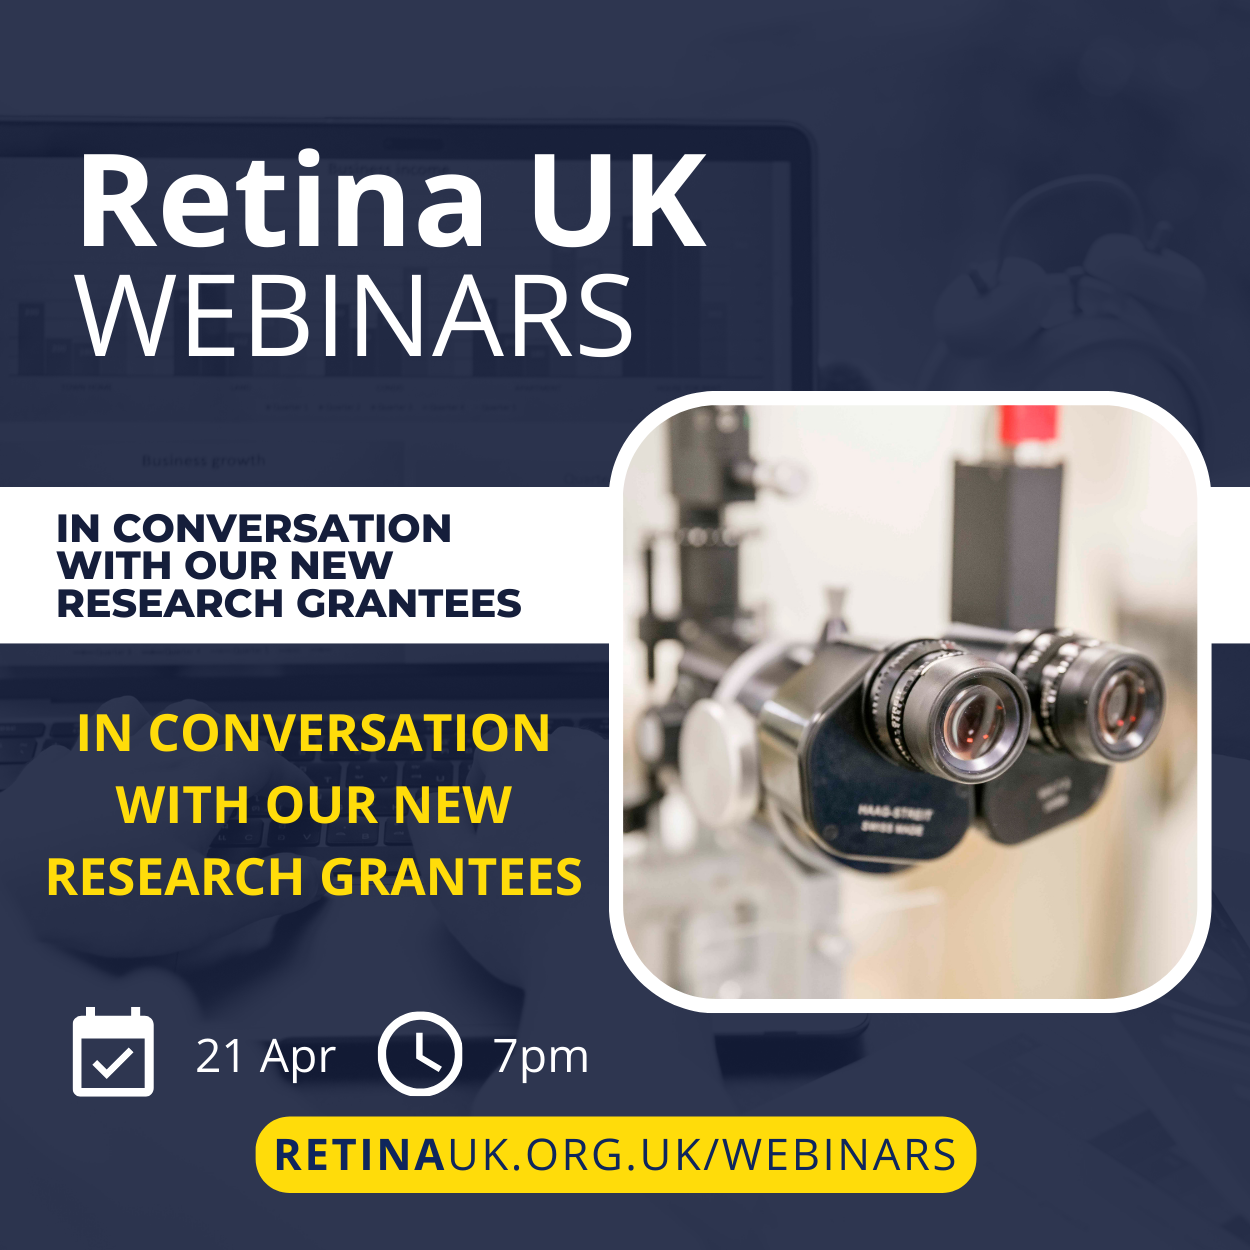 Retina UK webinars - In conversation with our new research grantees. 11 April 7.00pm